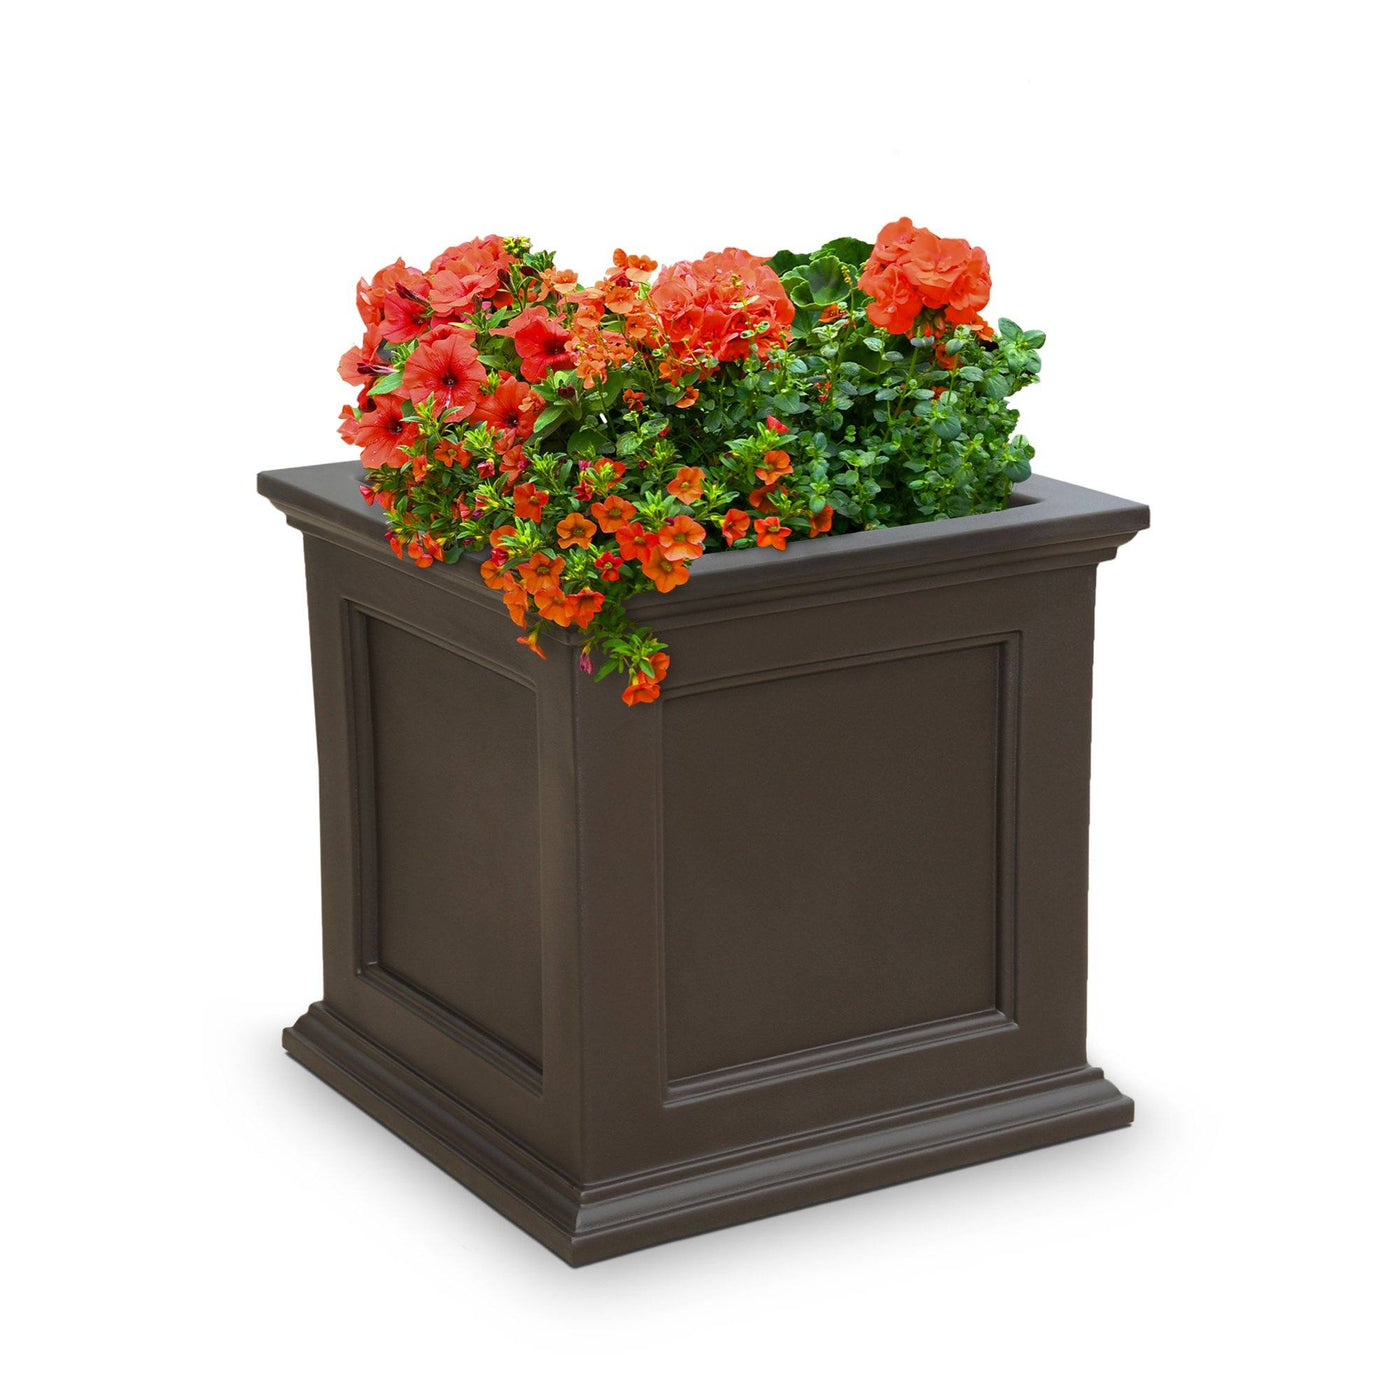 Beckett Patio Planter 20in x 20in Highwood USA 